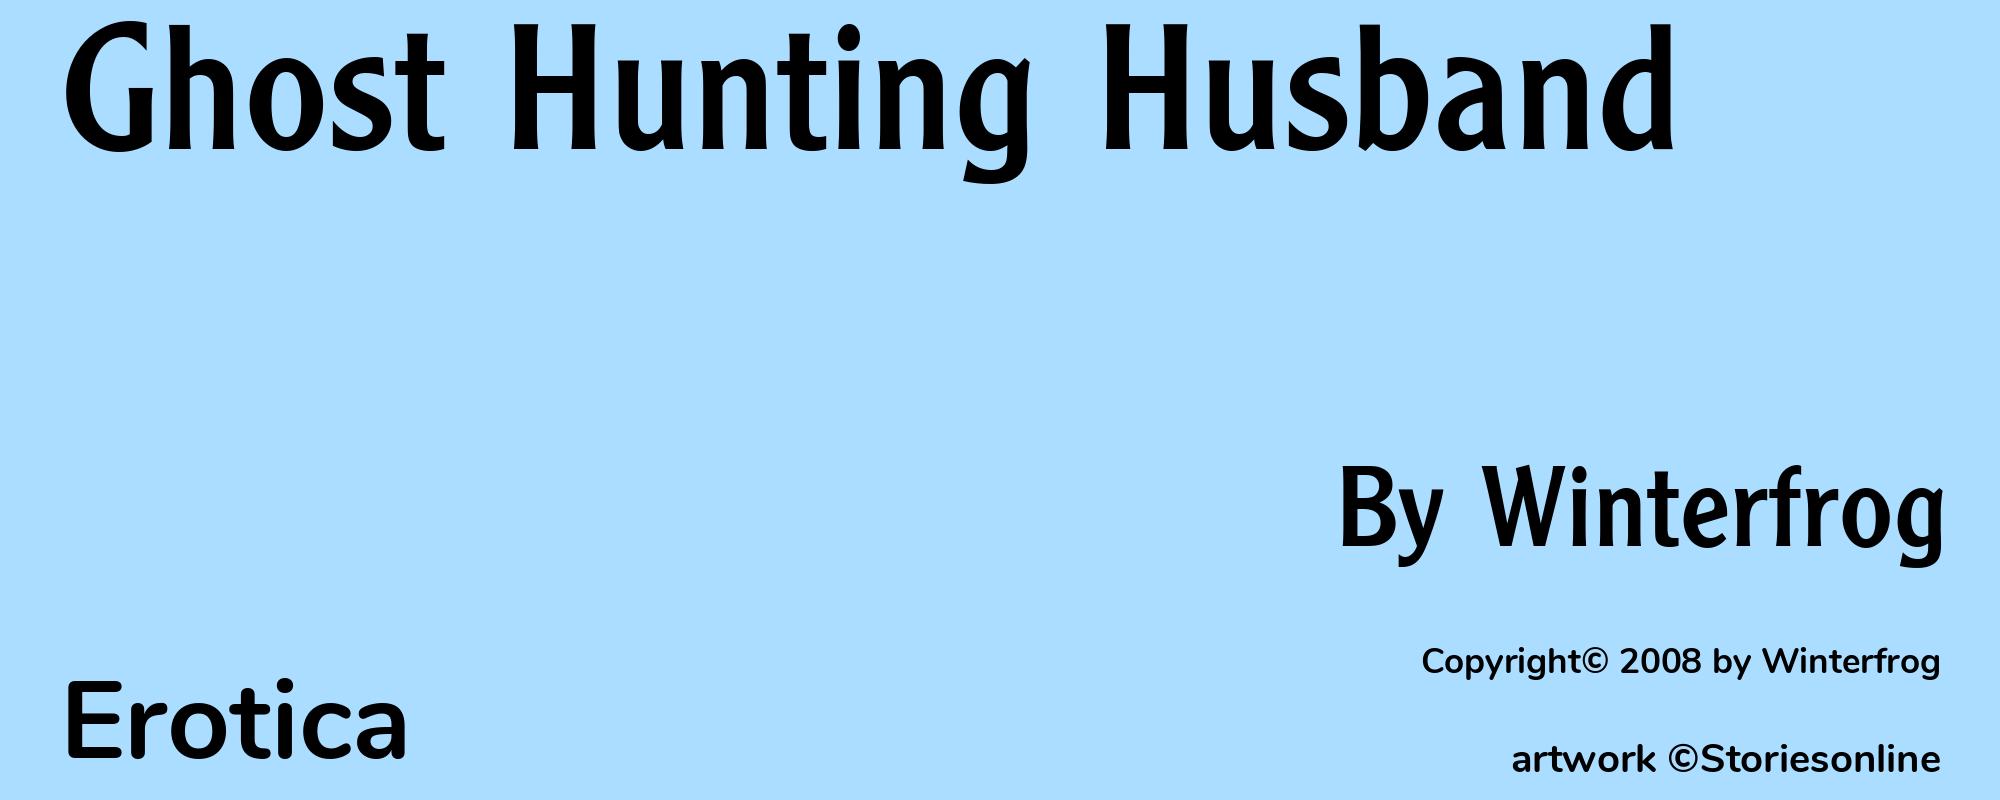 Ghost Hunting Husband - Cover